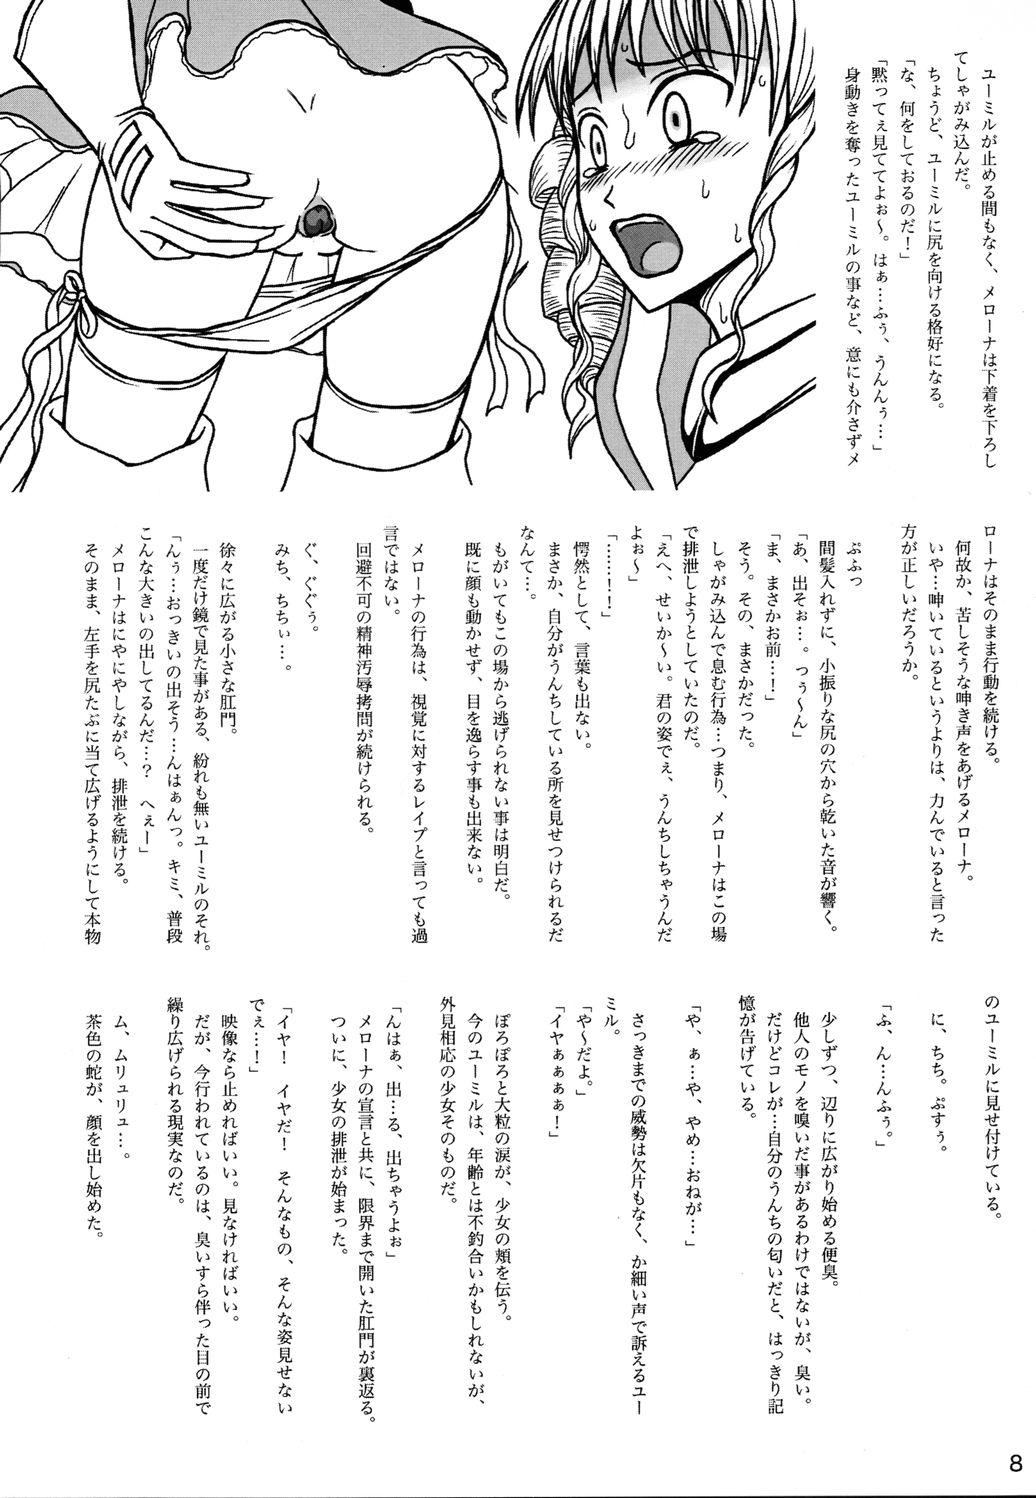 Chinese Queen's Blade Scatology EX - Queens blade Licking - Page 7